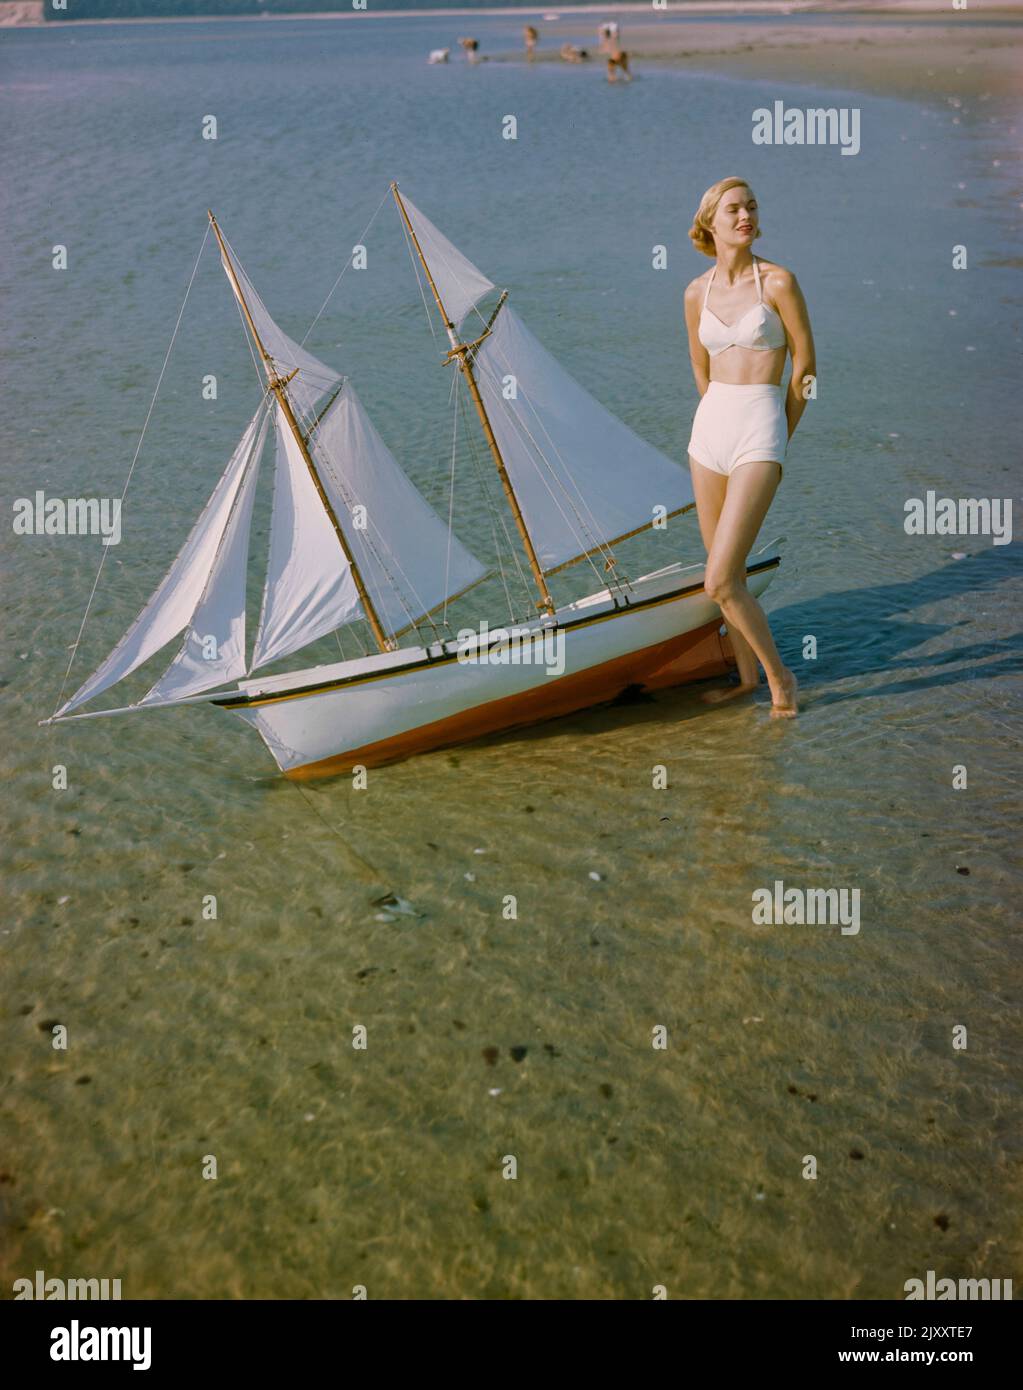 Portrait of Woman in Two-Piece Swimsuit standing on shore near Miniature Sailboat, Toni Frissell Collection, 1948 Stock Photo